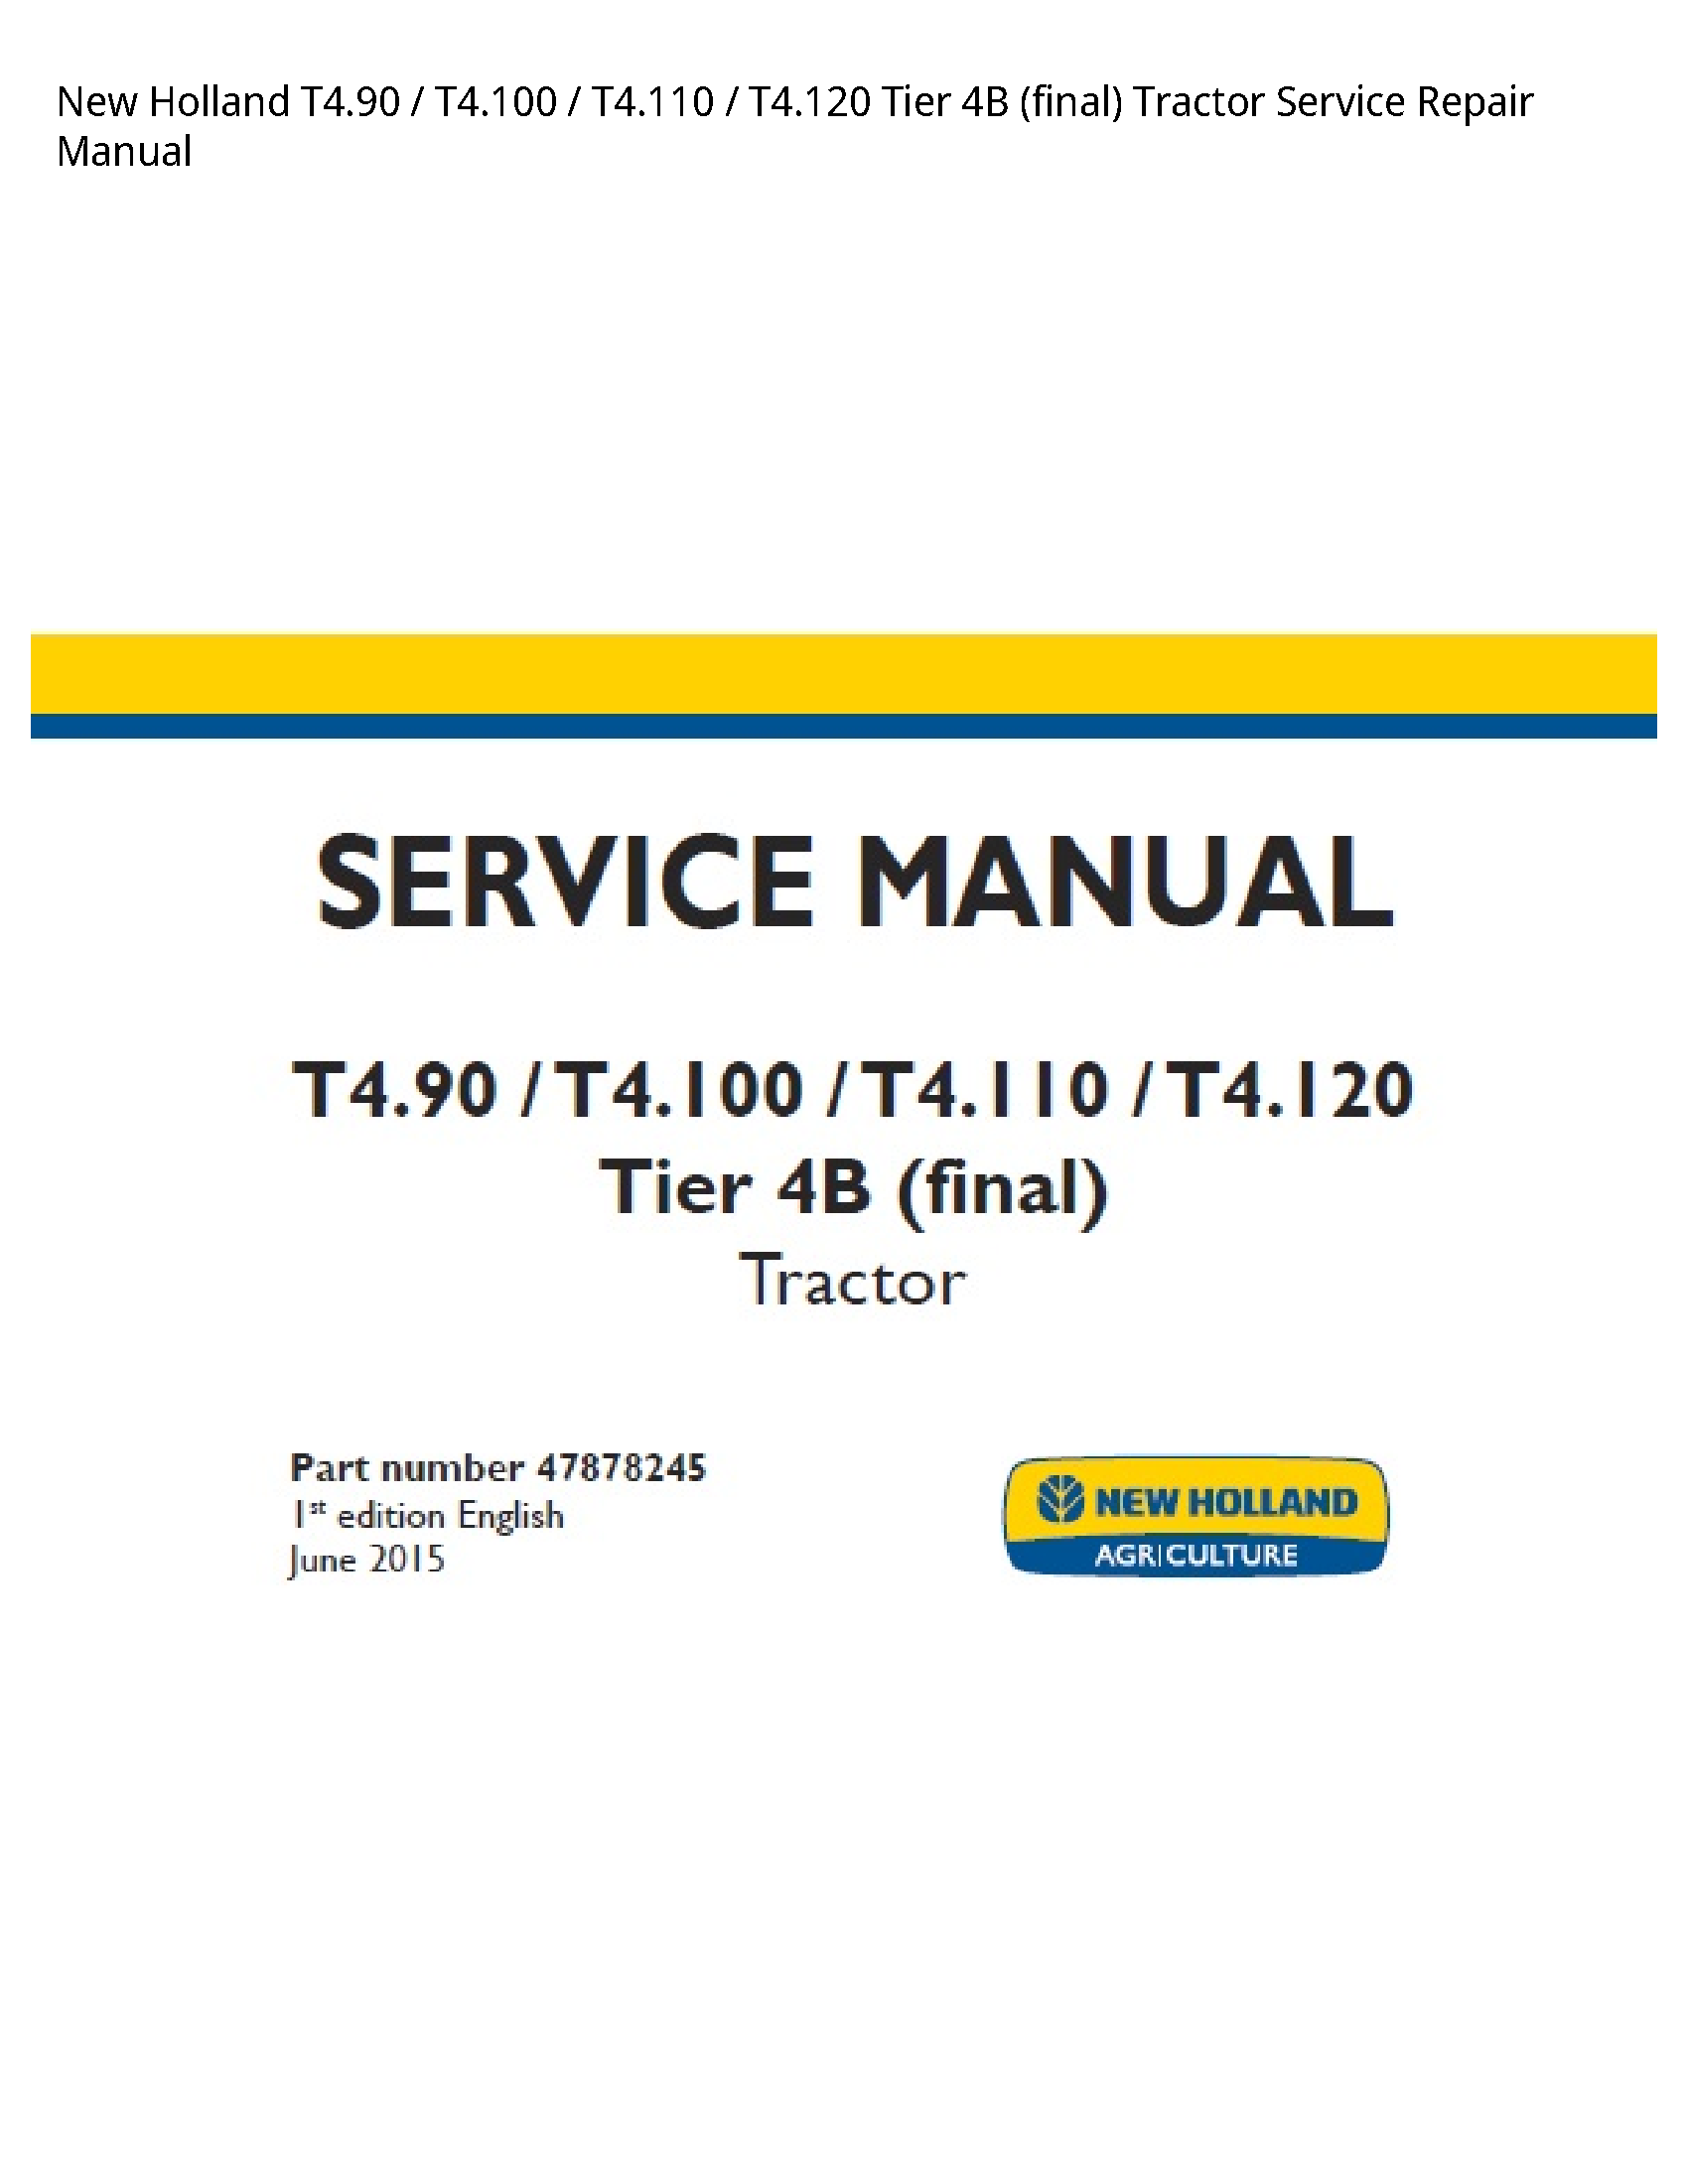 New Holland T4.90 Tier (final) Tractor manual